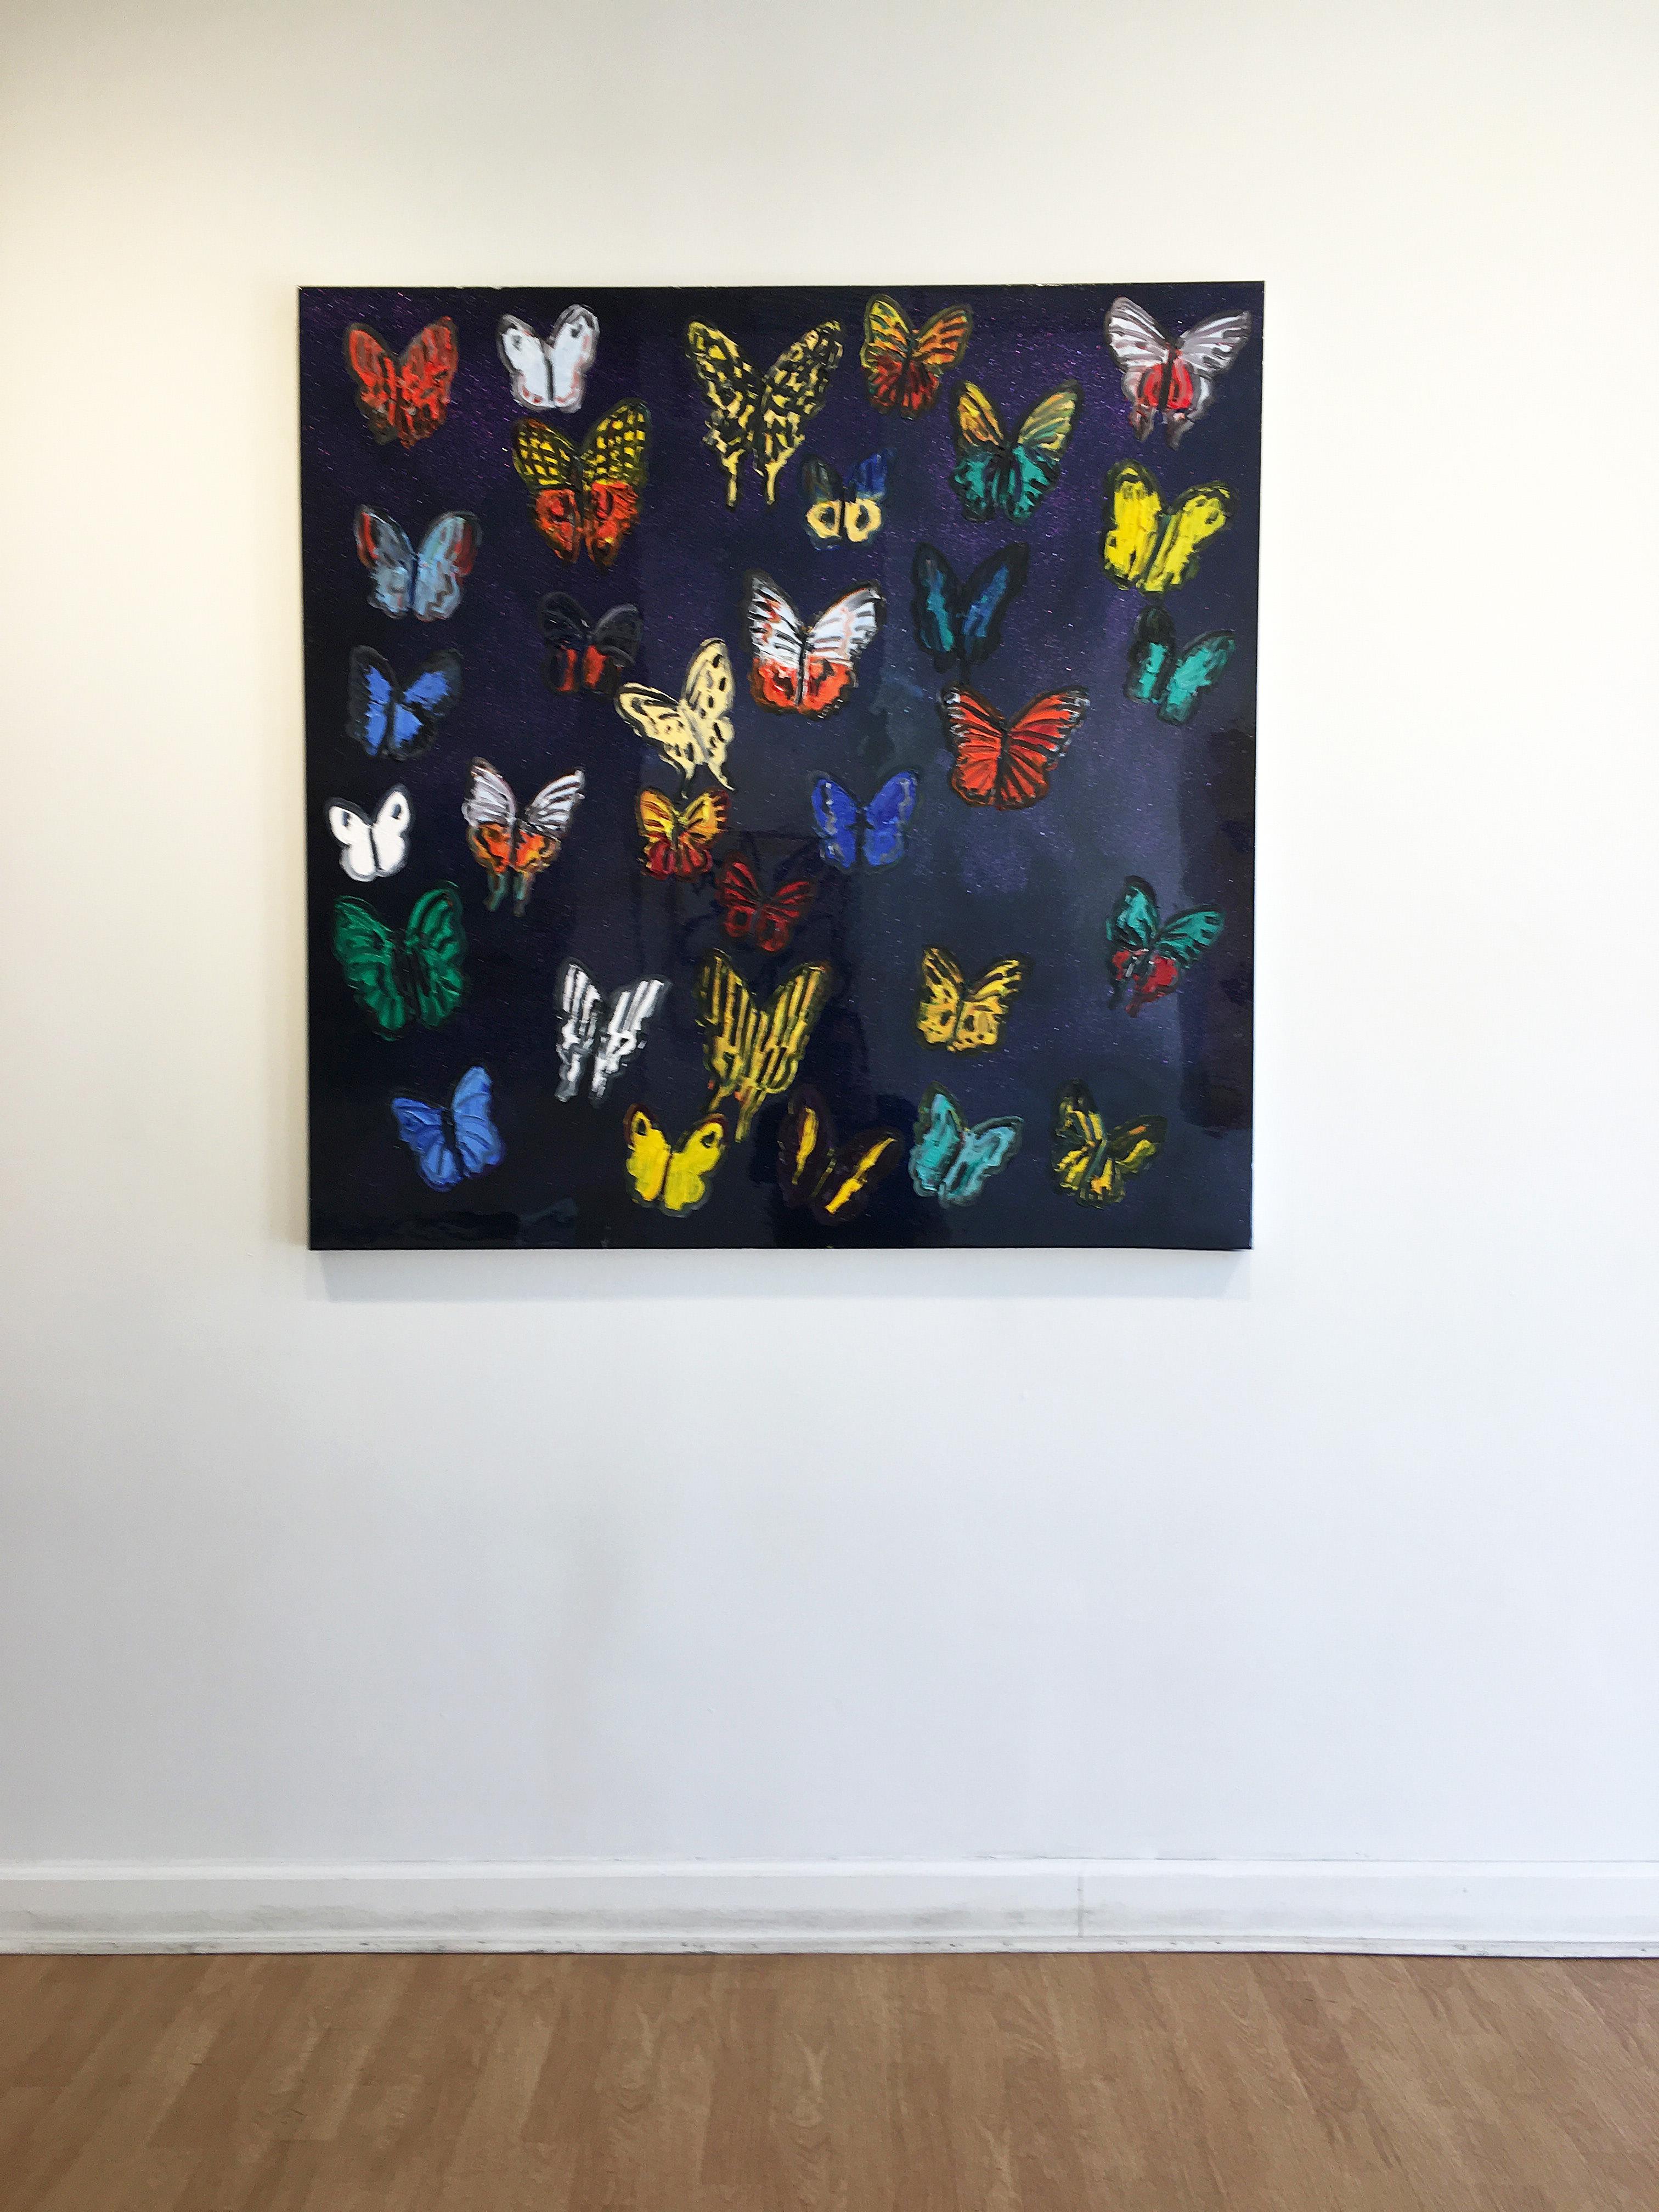 'Butterflies' 2019 by renowned New York City artist, Hunt Slonem. Oil, acrylic and resin on canvas, 48 x 48 in.  This painting features a charming portrait of butterflies. The artist's ongoing experimentation with unconventional methodologies and